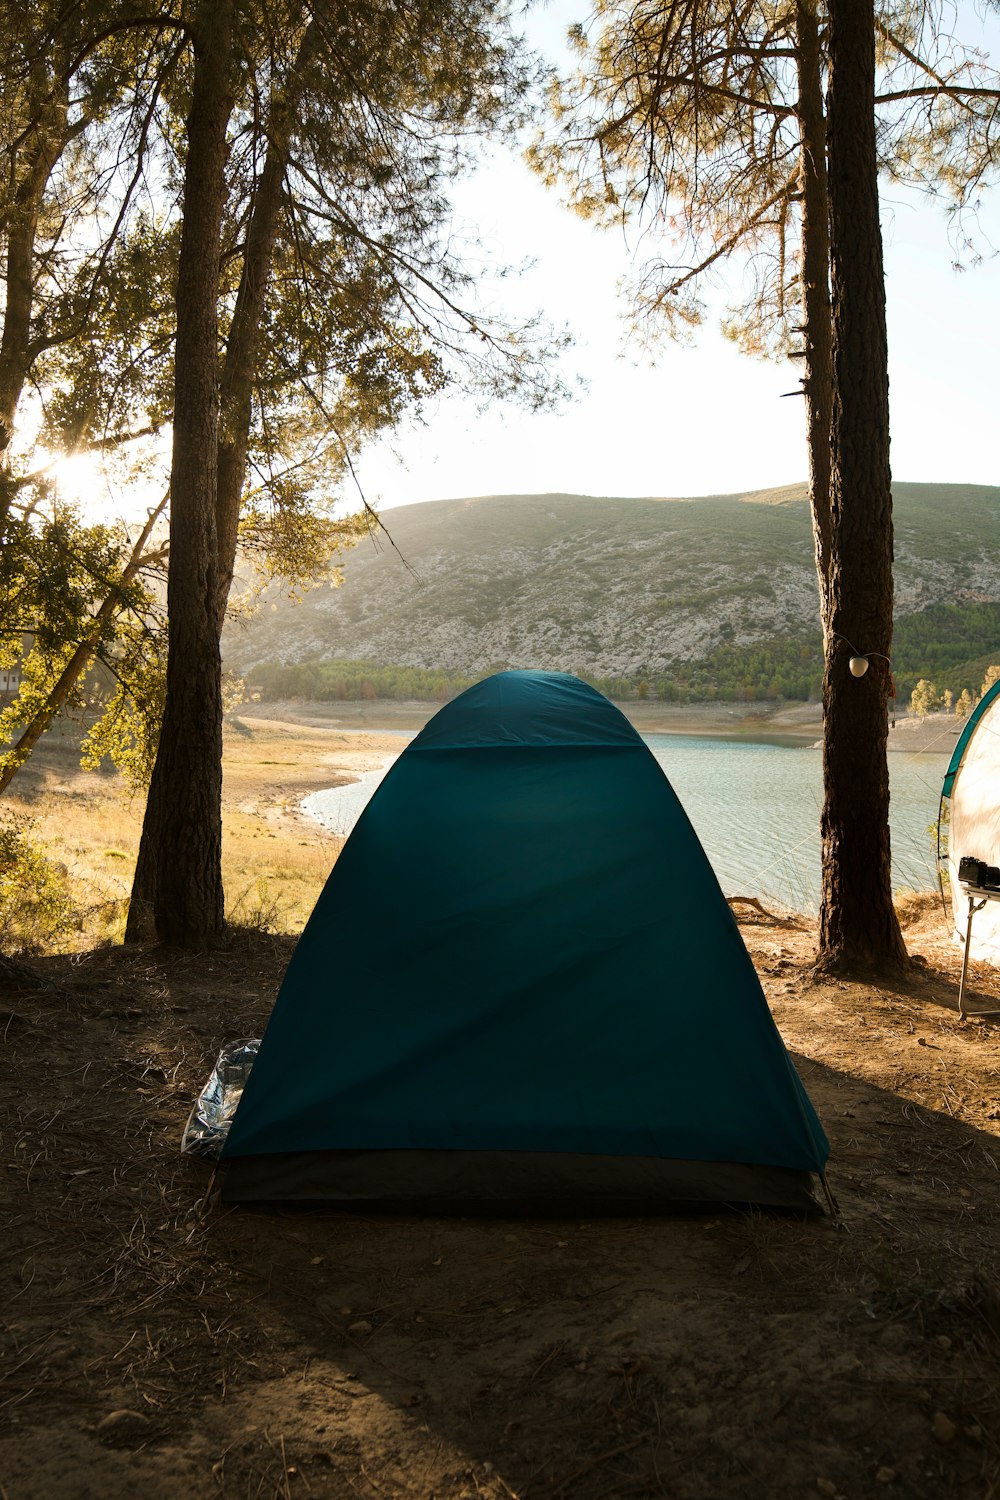 teal tent near trees and lake during day